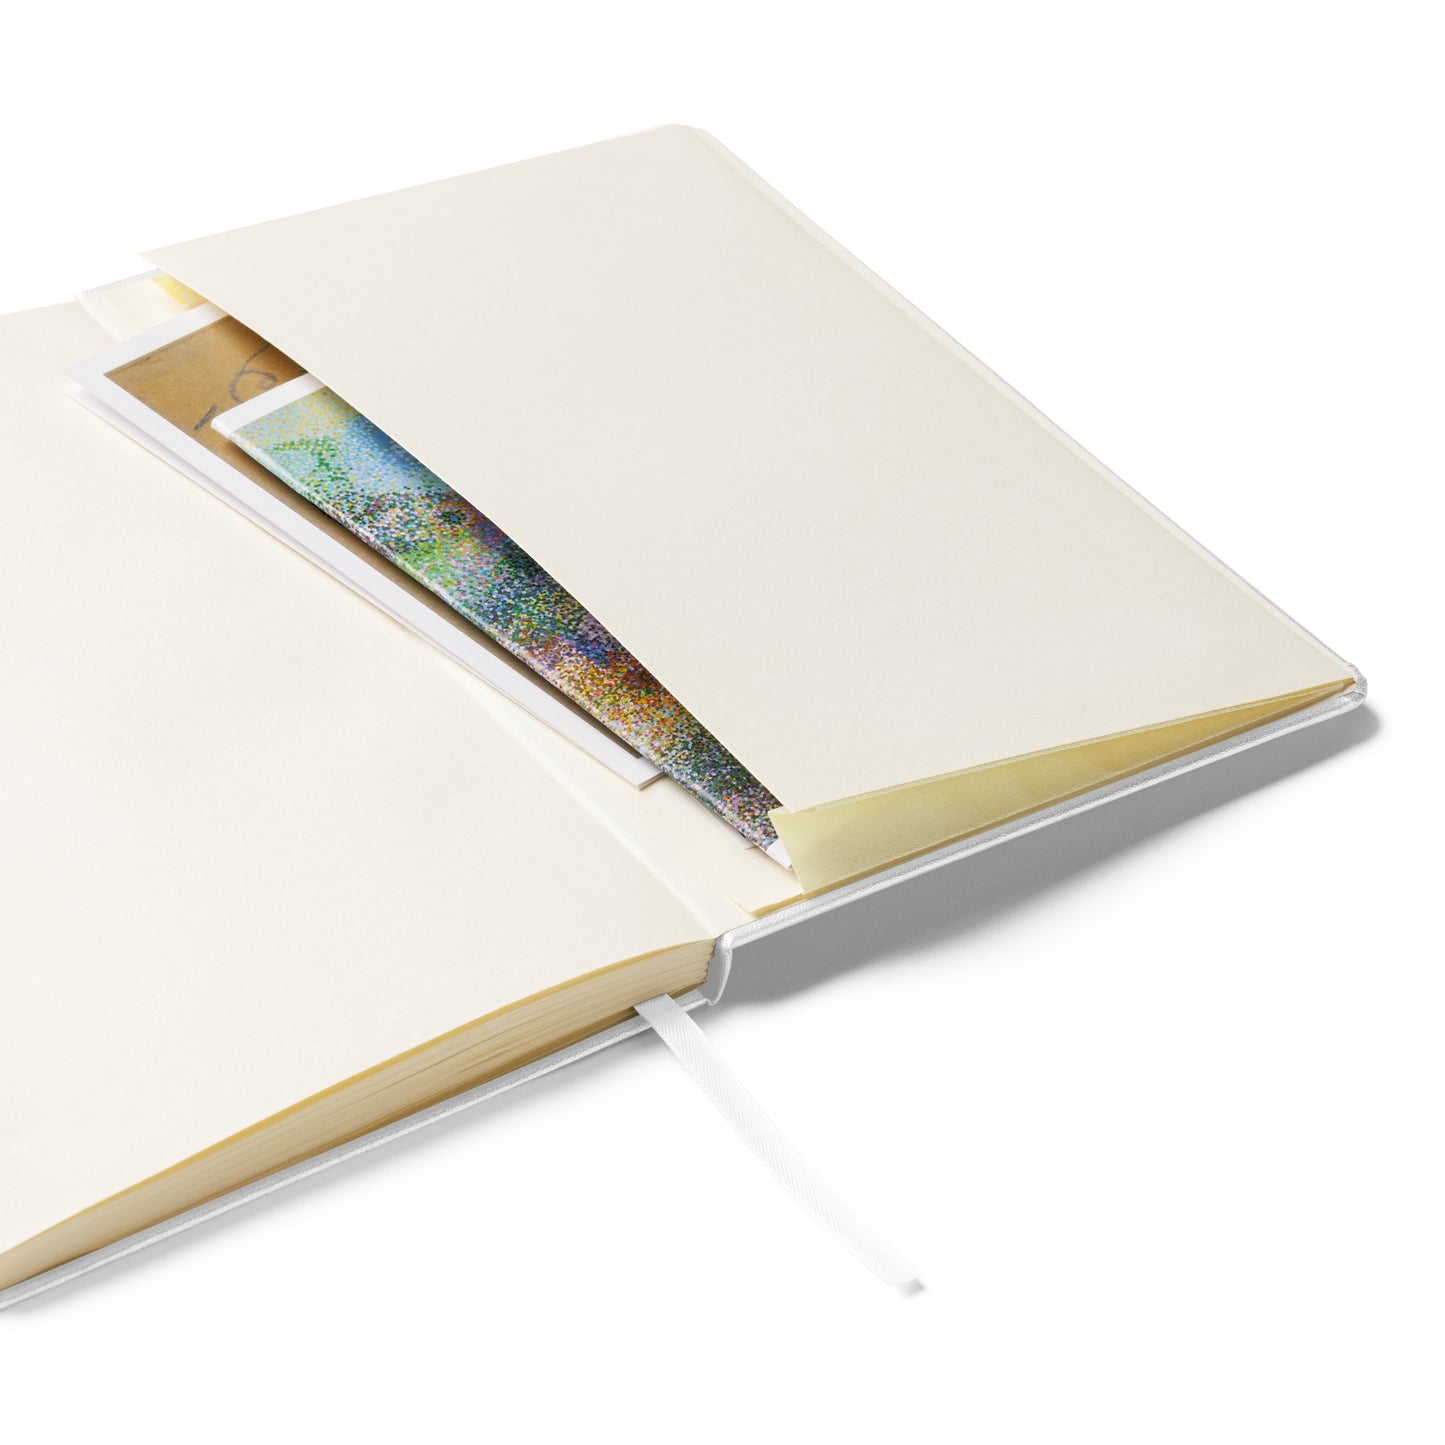 "What more can I say?" Hardcover bound notebook